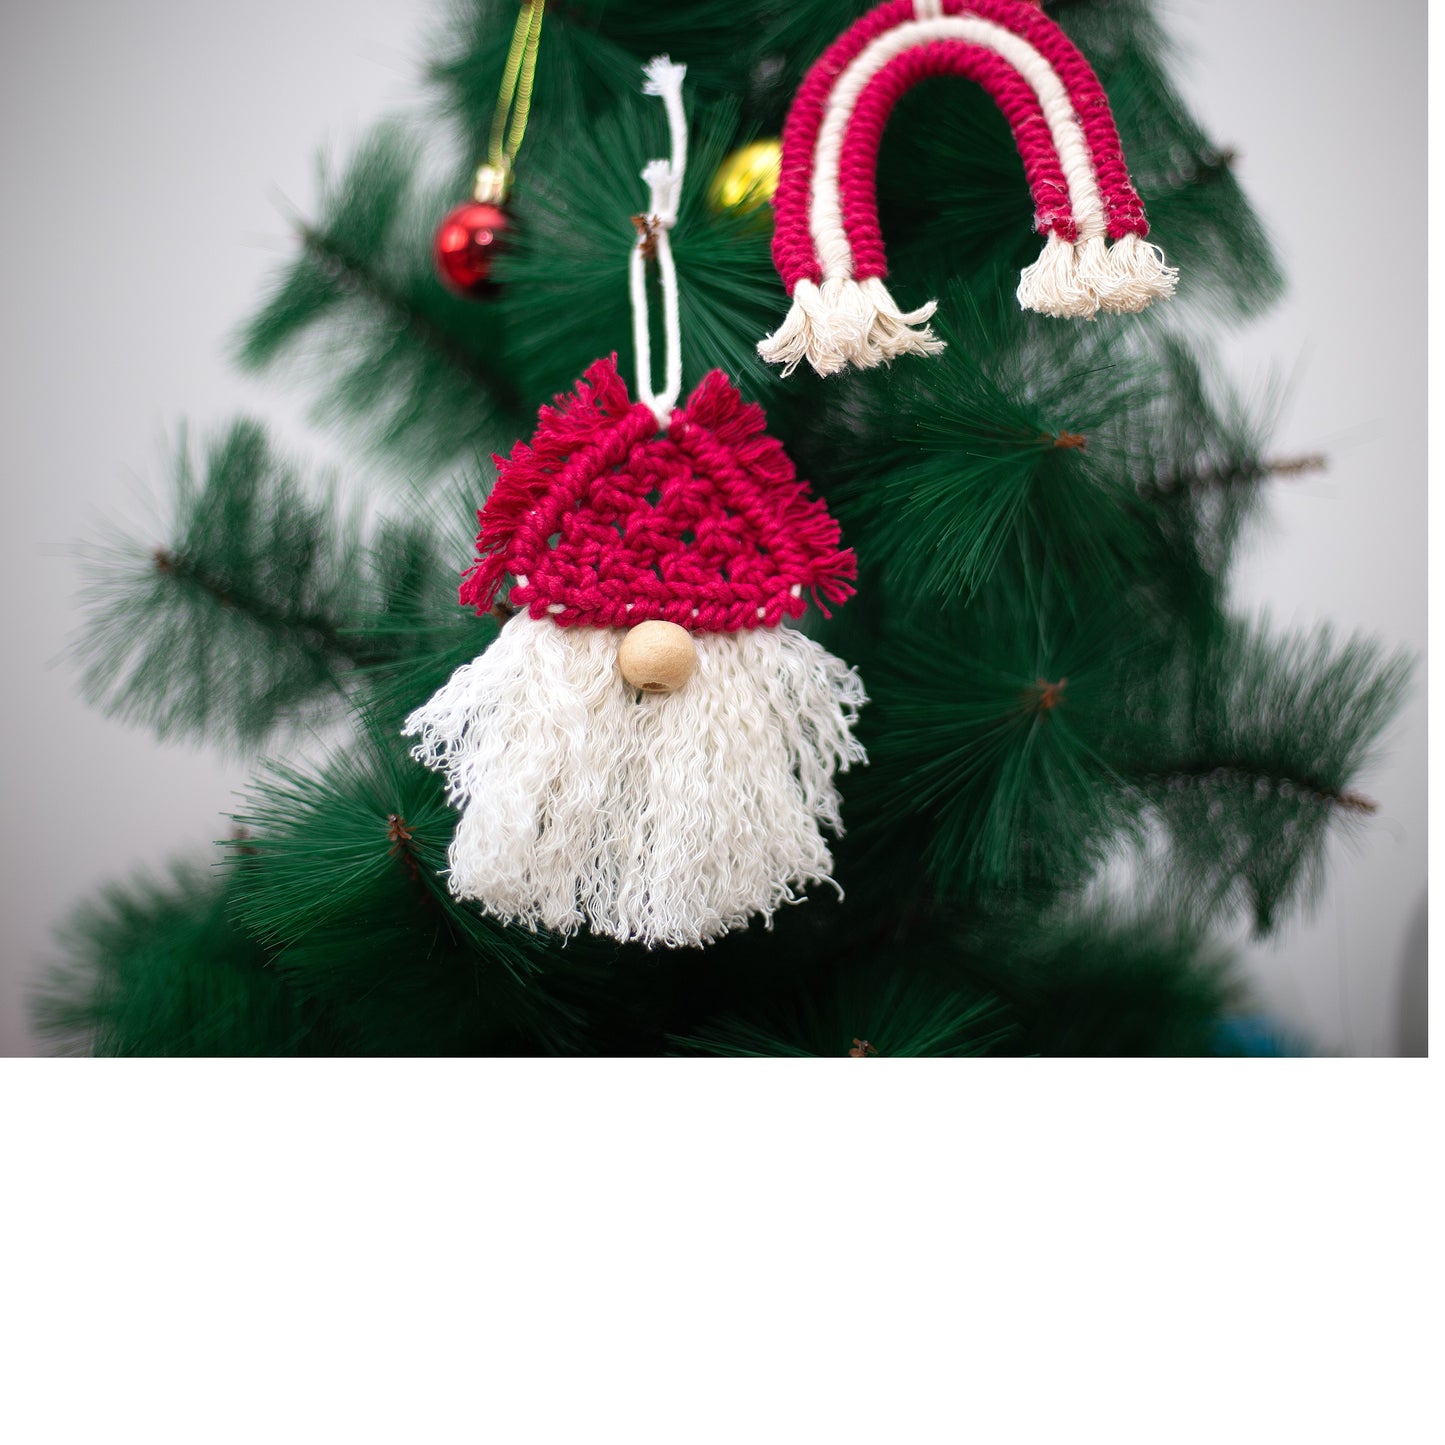 Christmas Tree Ornament in Macrame - Gnome